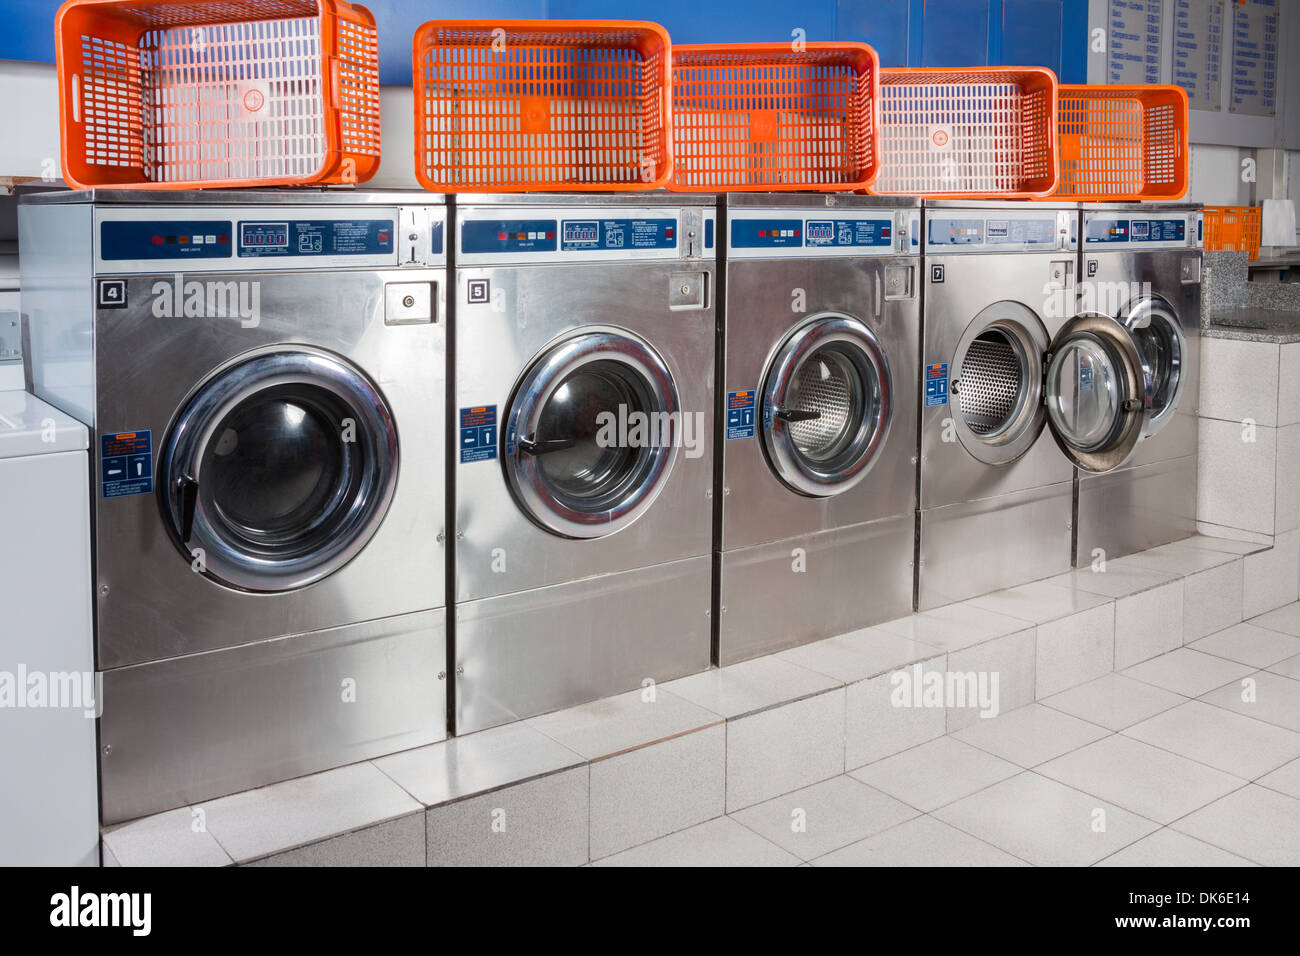 Washing Machines And Empty Baskets In A Row Stock Photo